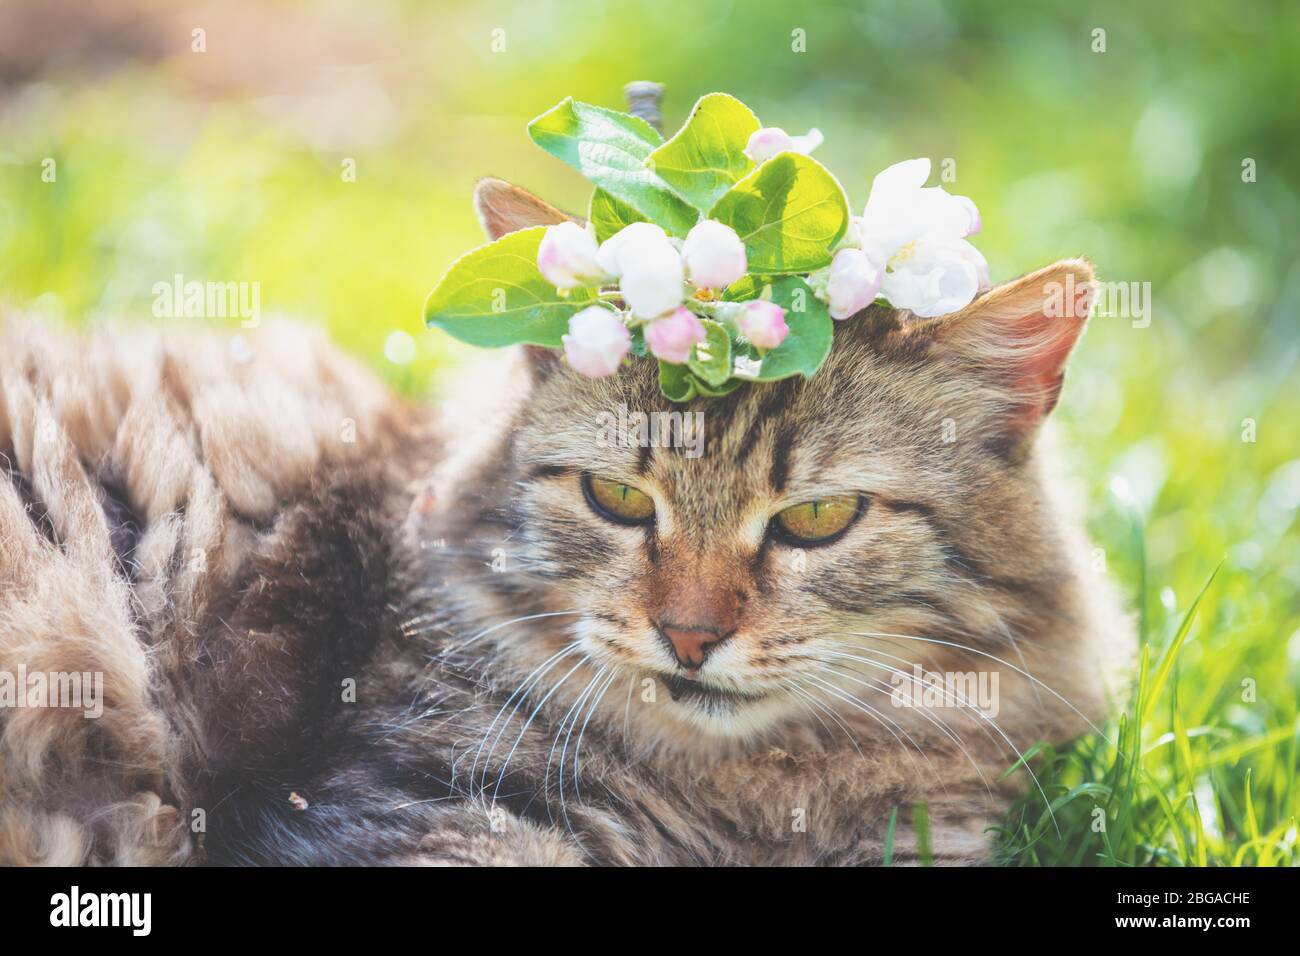 Siberian cat with flowers on the head in the spring garden Stock Photo